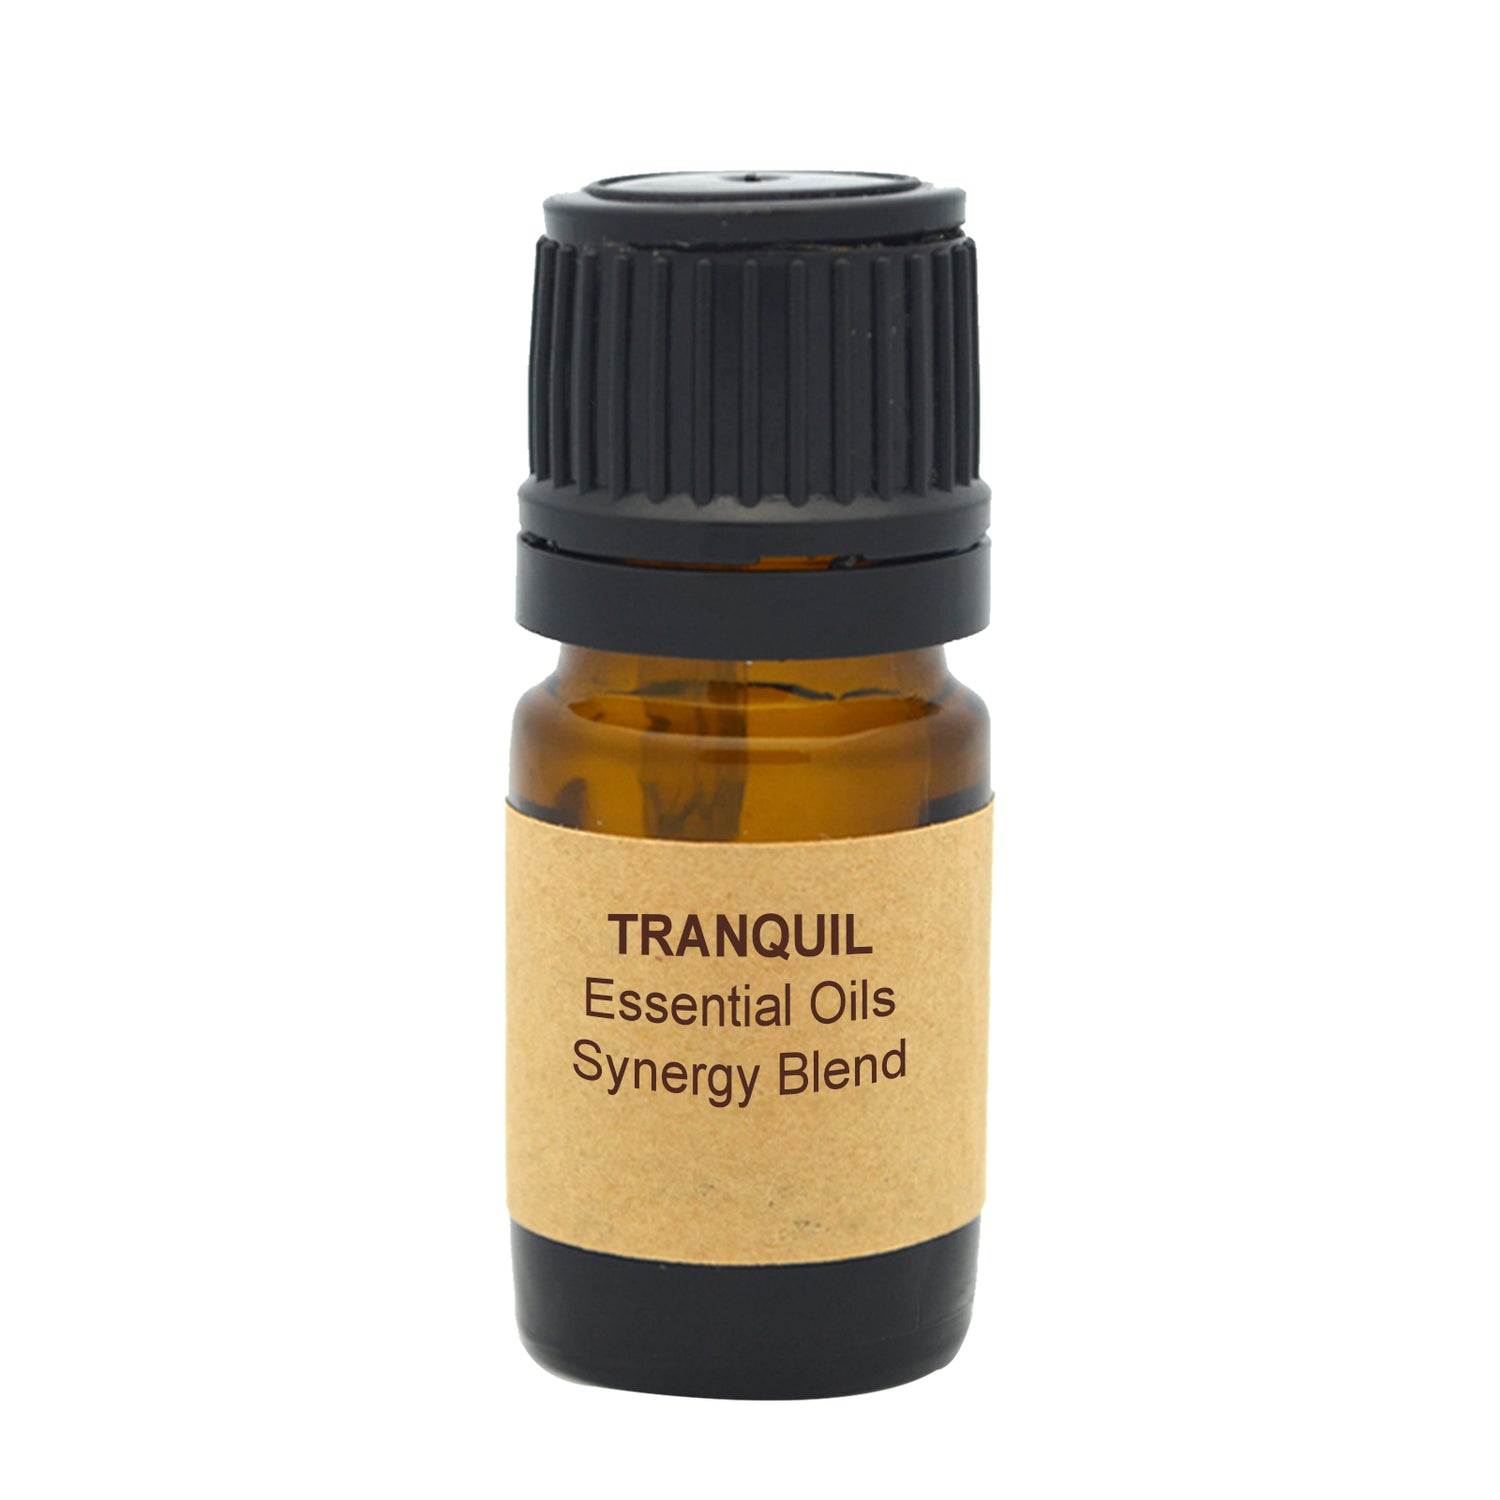 Tranquil Essential Oils Synergy Blend.